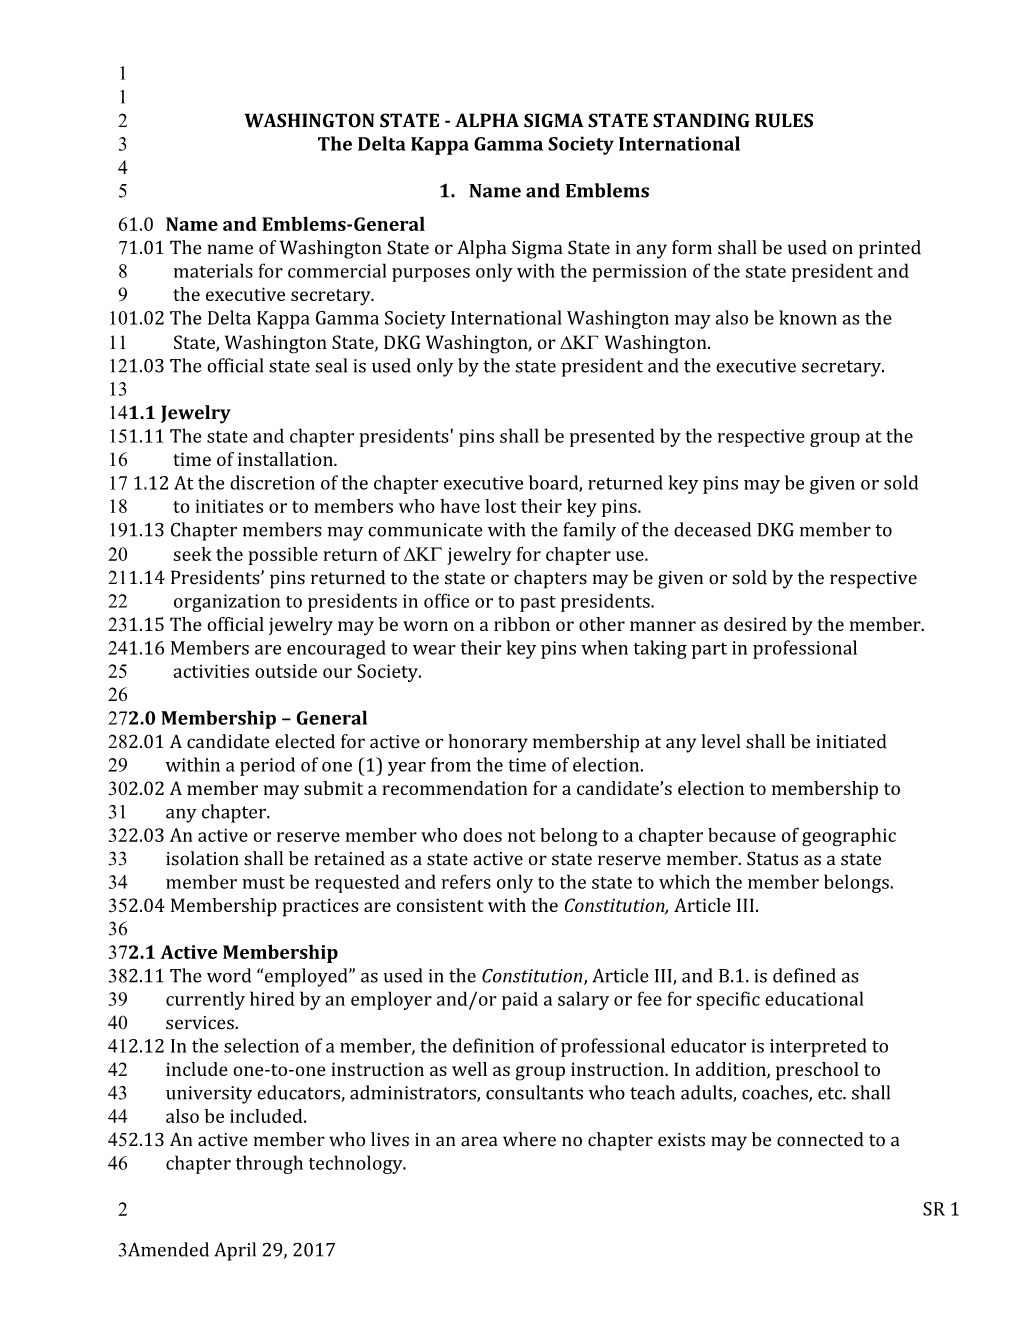 Proposed 2011 Standing Rules